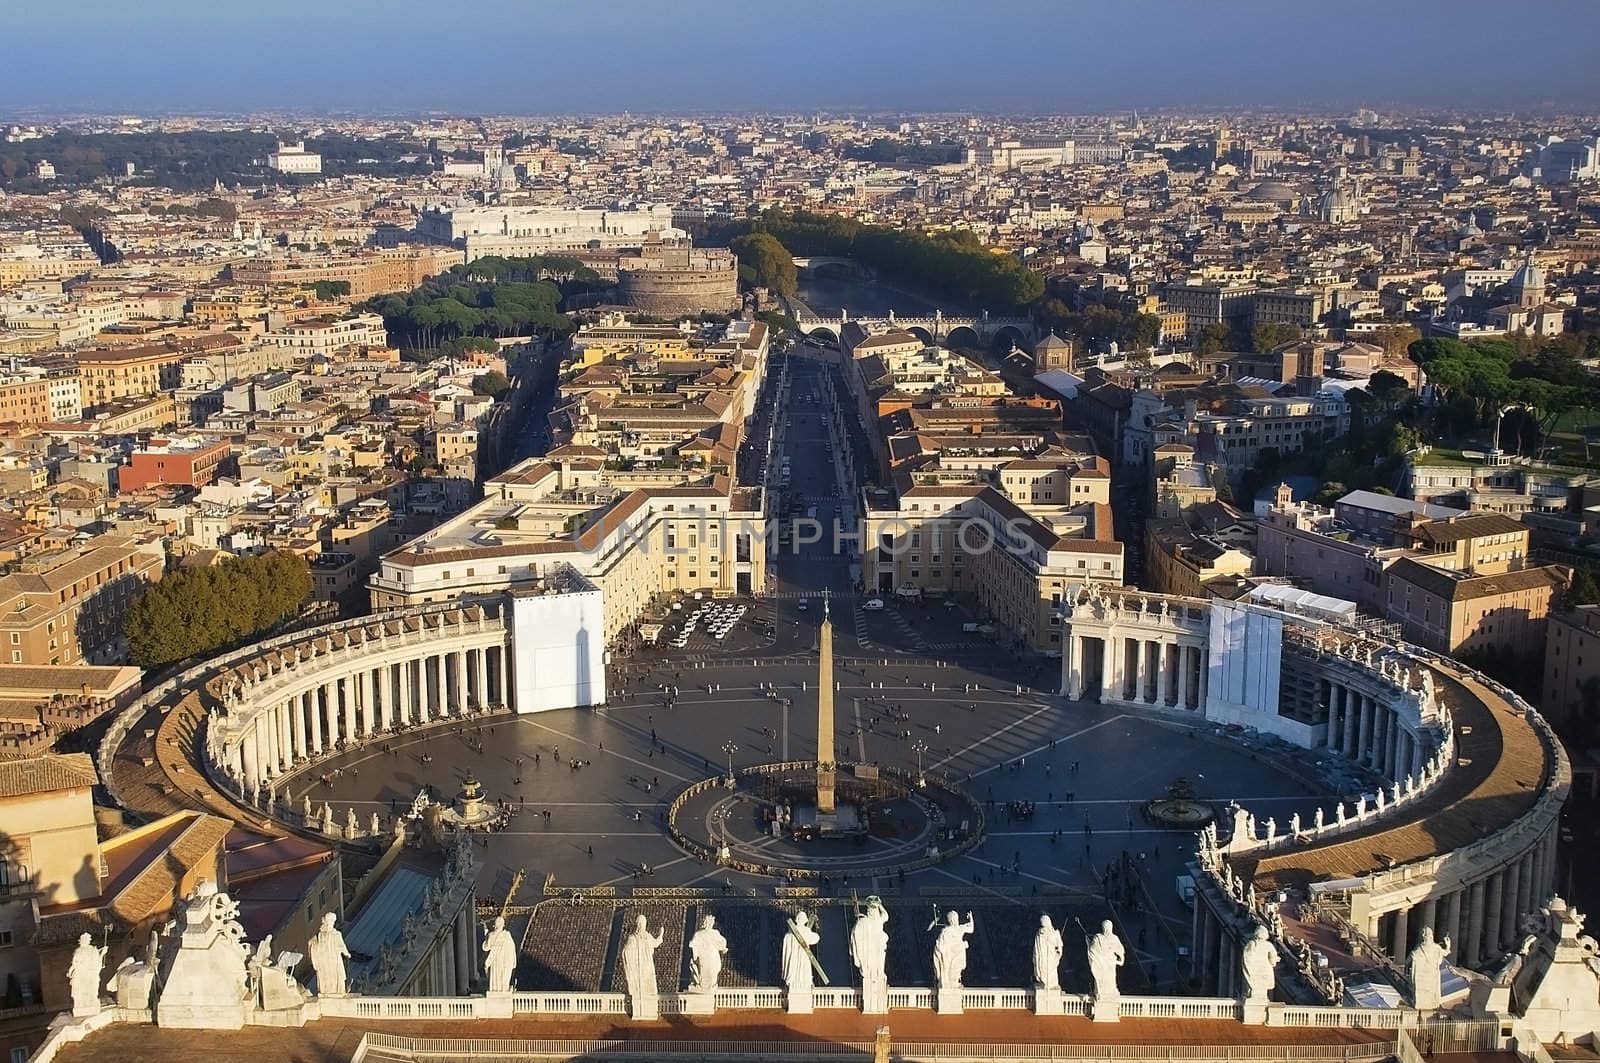 panoramic view of St.Peter's Square in Rome by irisphoto4